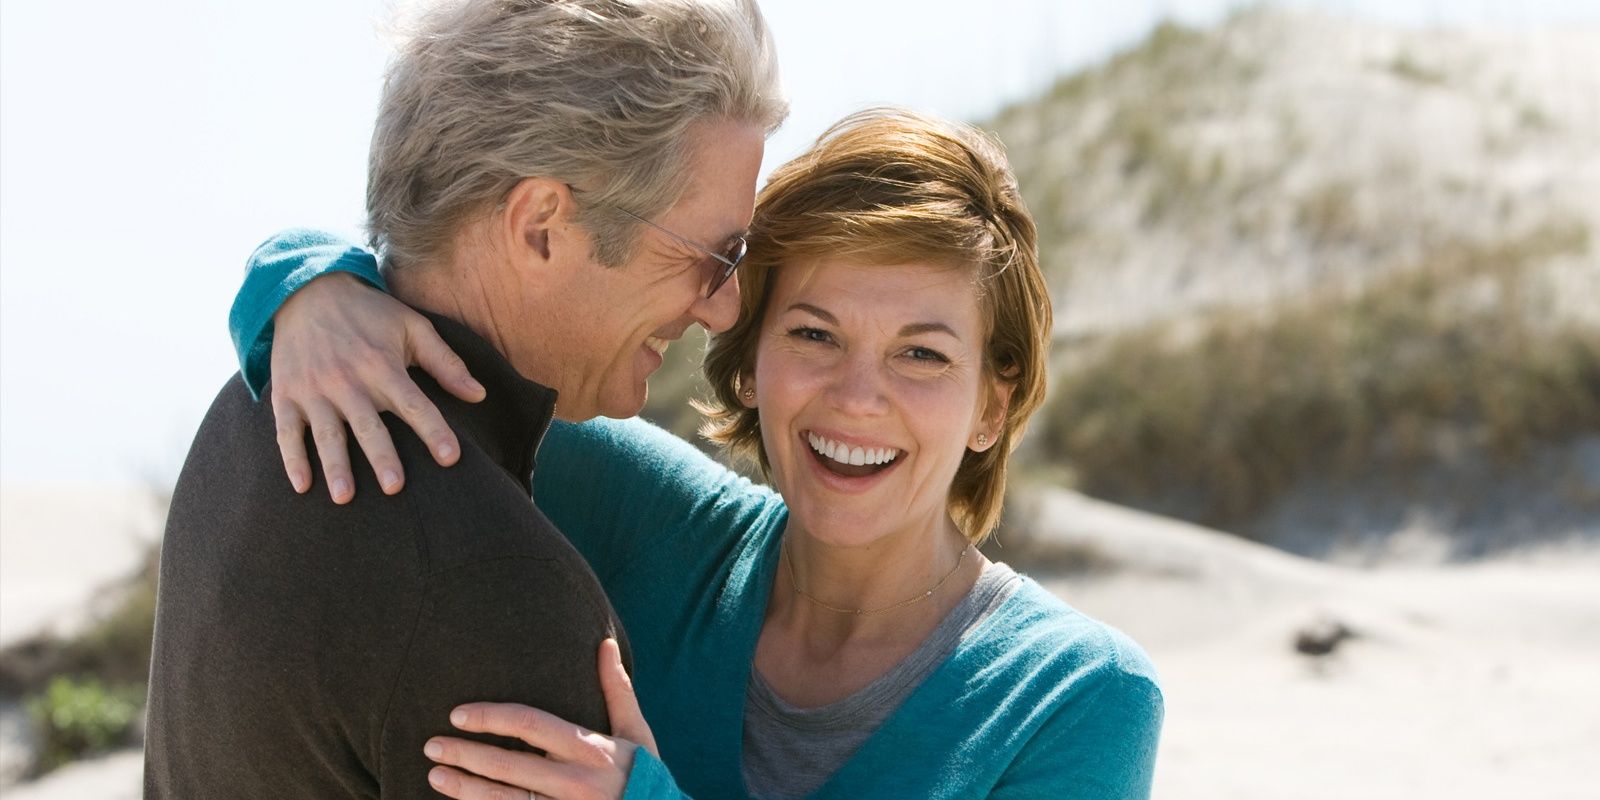 Nicholas Sparks Couples Nights in Rodanthe Cropped